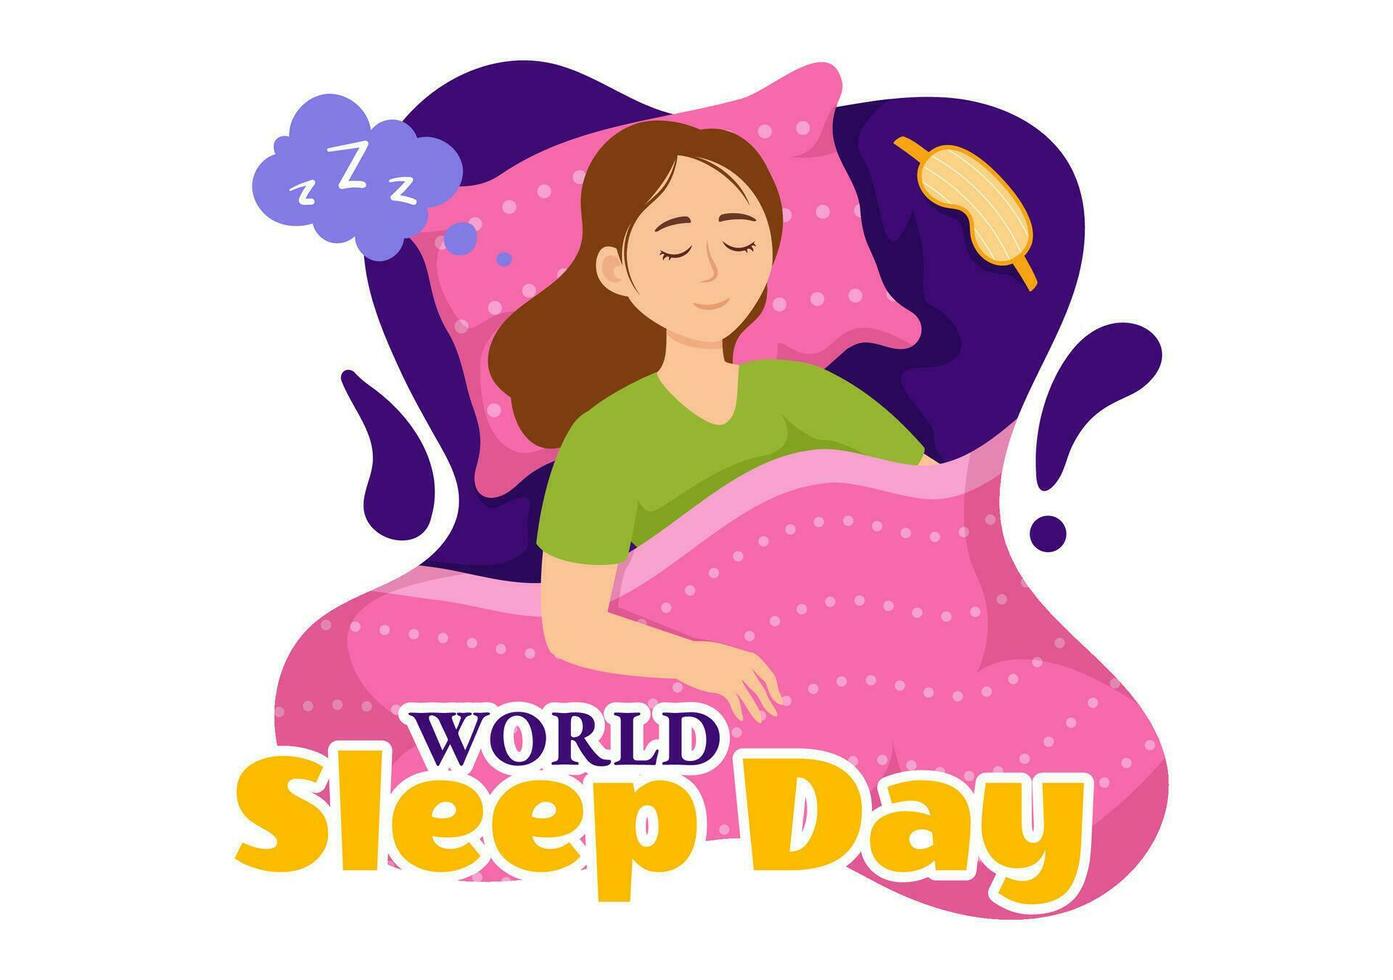 World Sleep Day Vector Illustration on March 17 with People Sleeping, Clouds, Planet Earth and the Moon in Sky Backgrounds Flat Cartoon Design